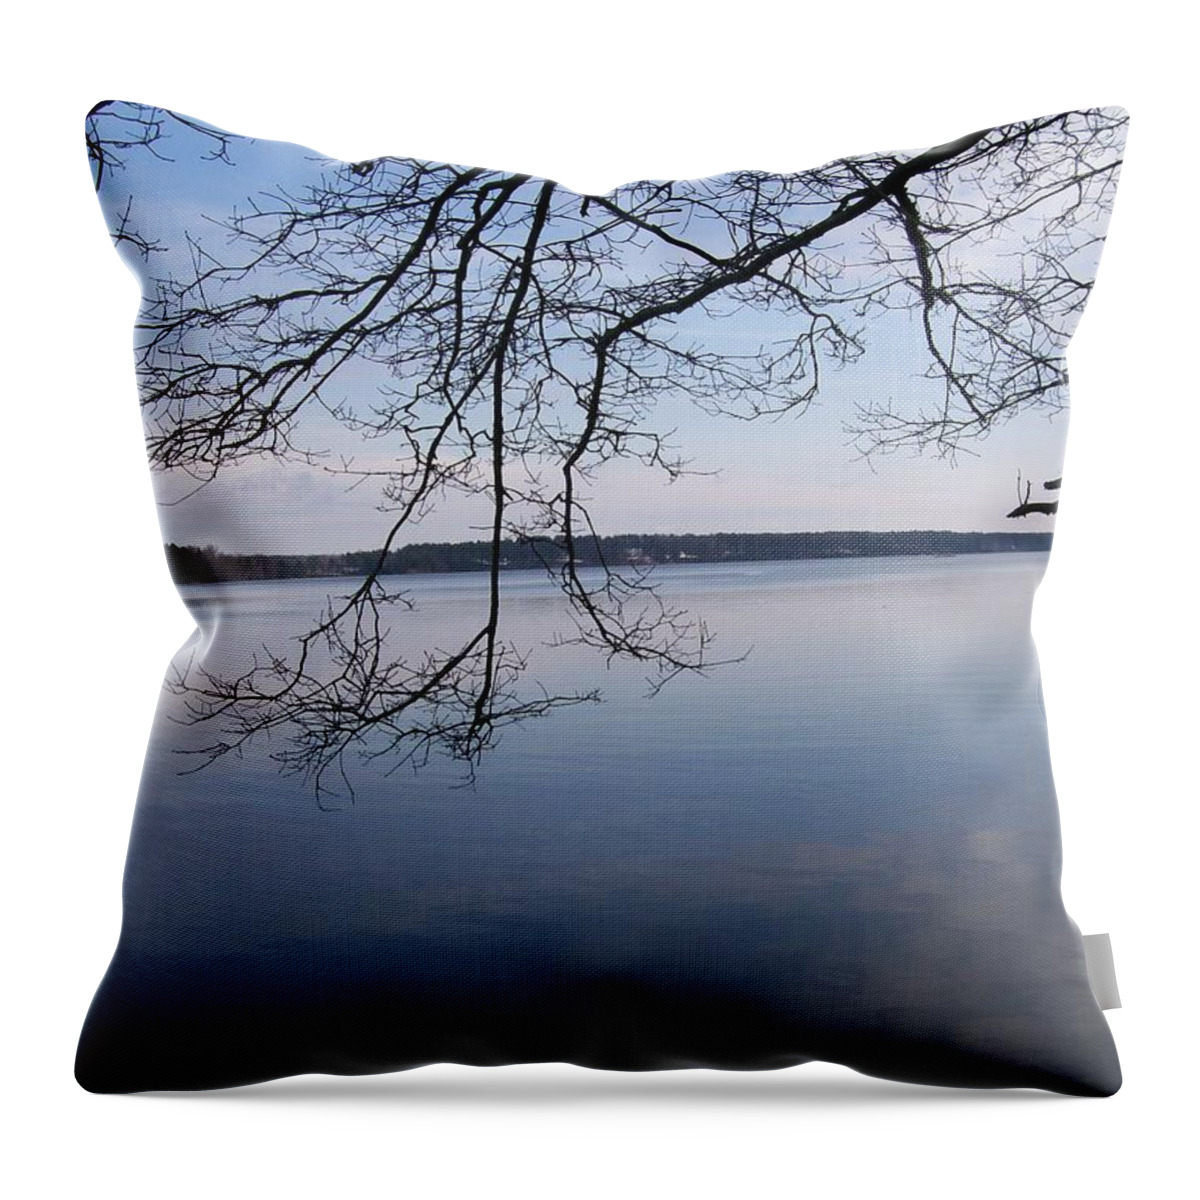 Photography Throw Pillow featuring the digital art Not A Ripple by Barbara S Nickerson